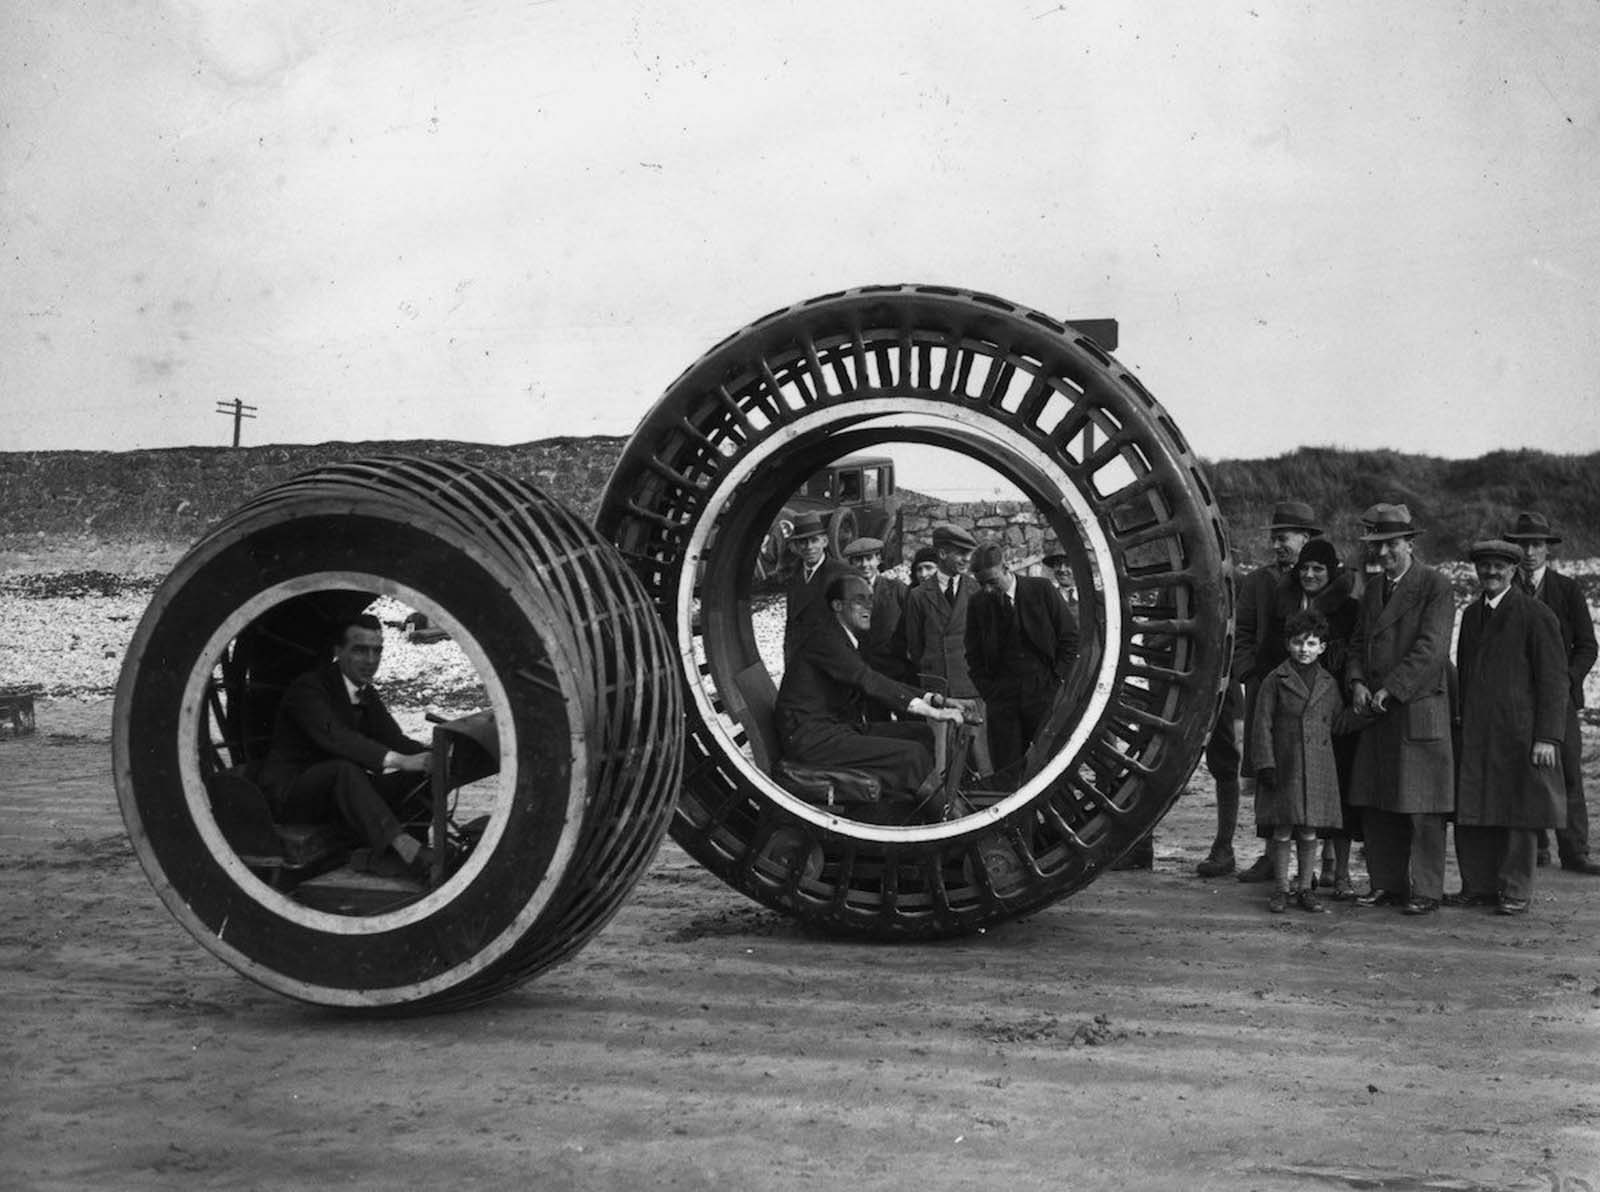 Dynasphere wheels being driven on Beans Sands near Weston-super-Mare, Somerset, England.